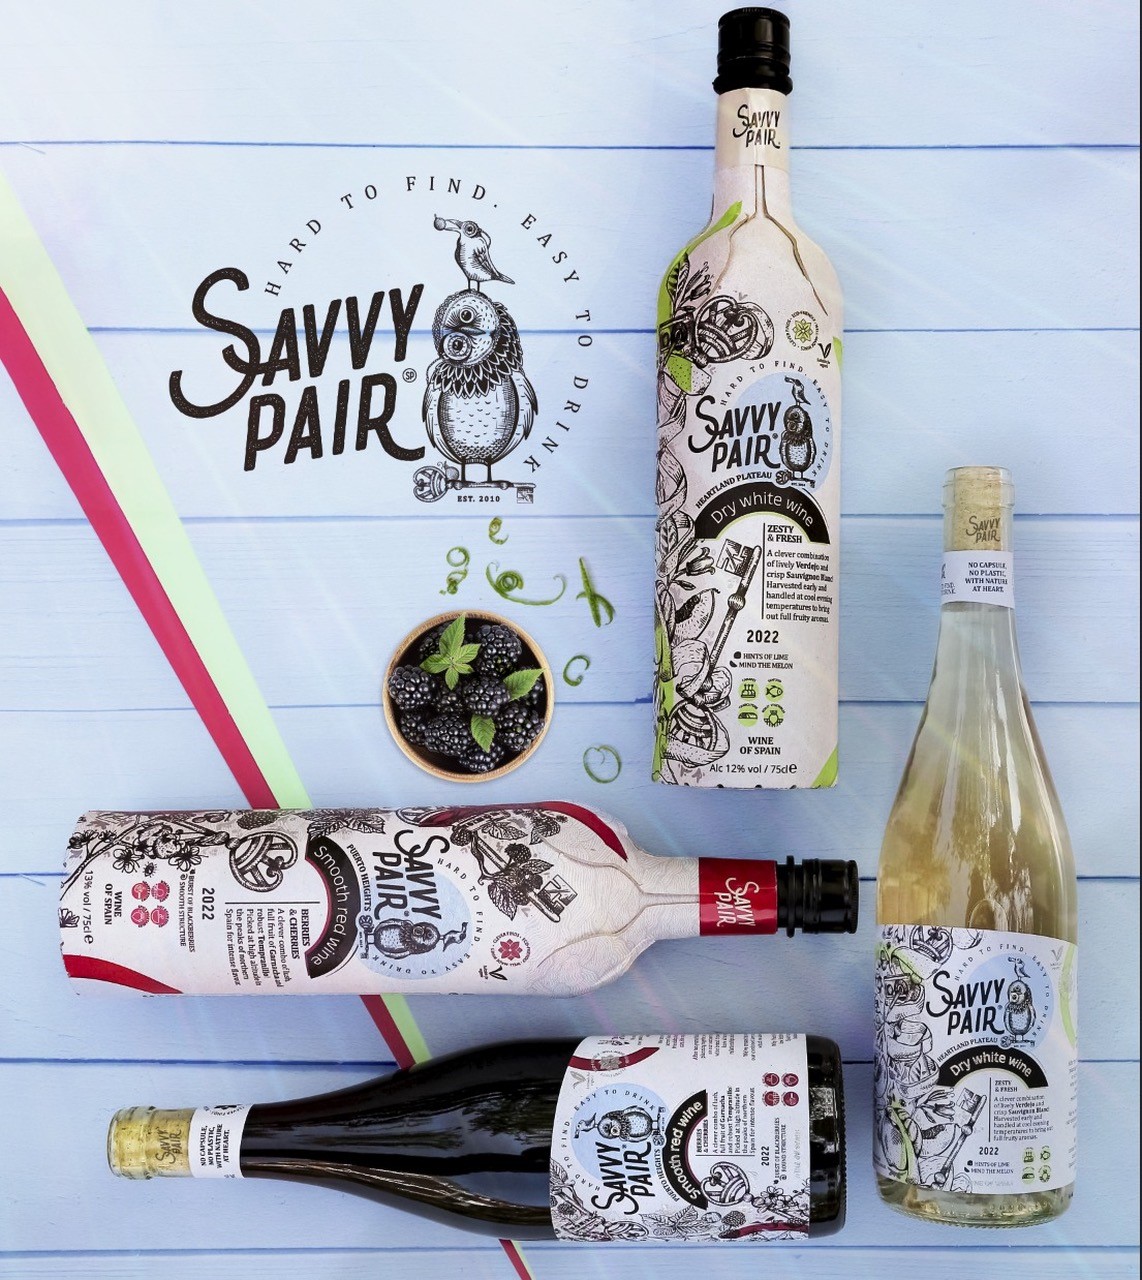 Savvy Pair win design award for their new wine in a Frugal Bottle